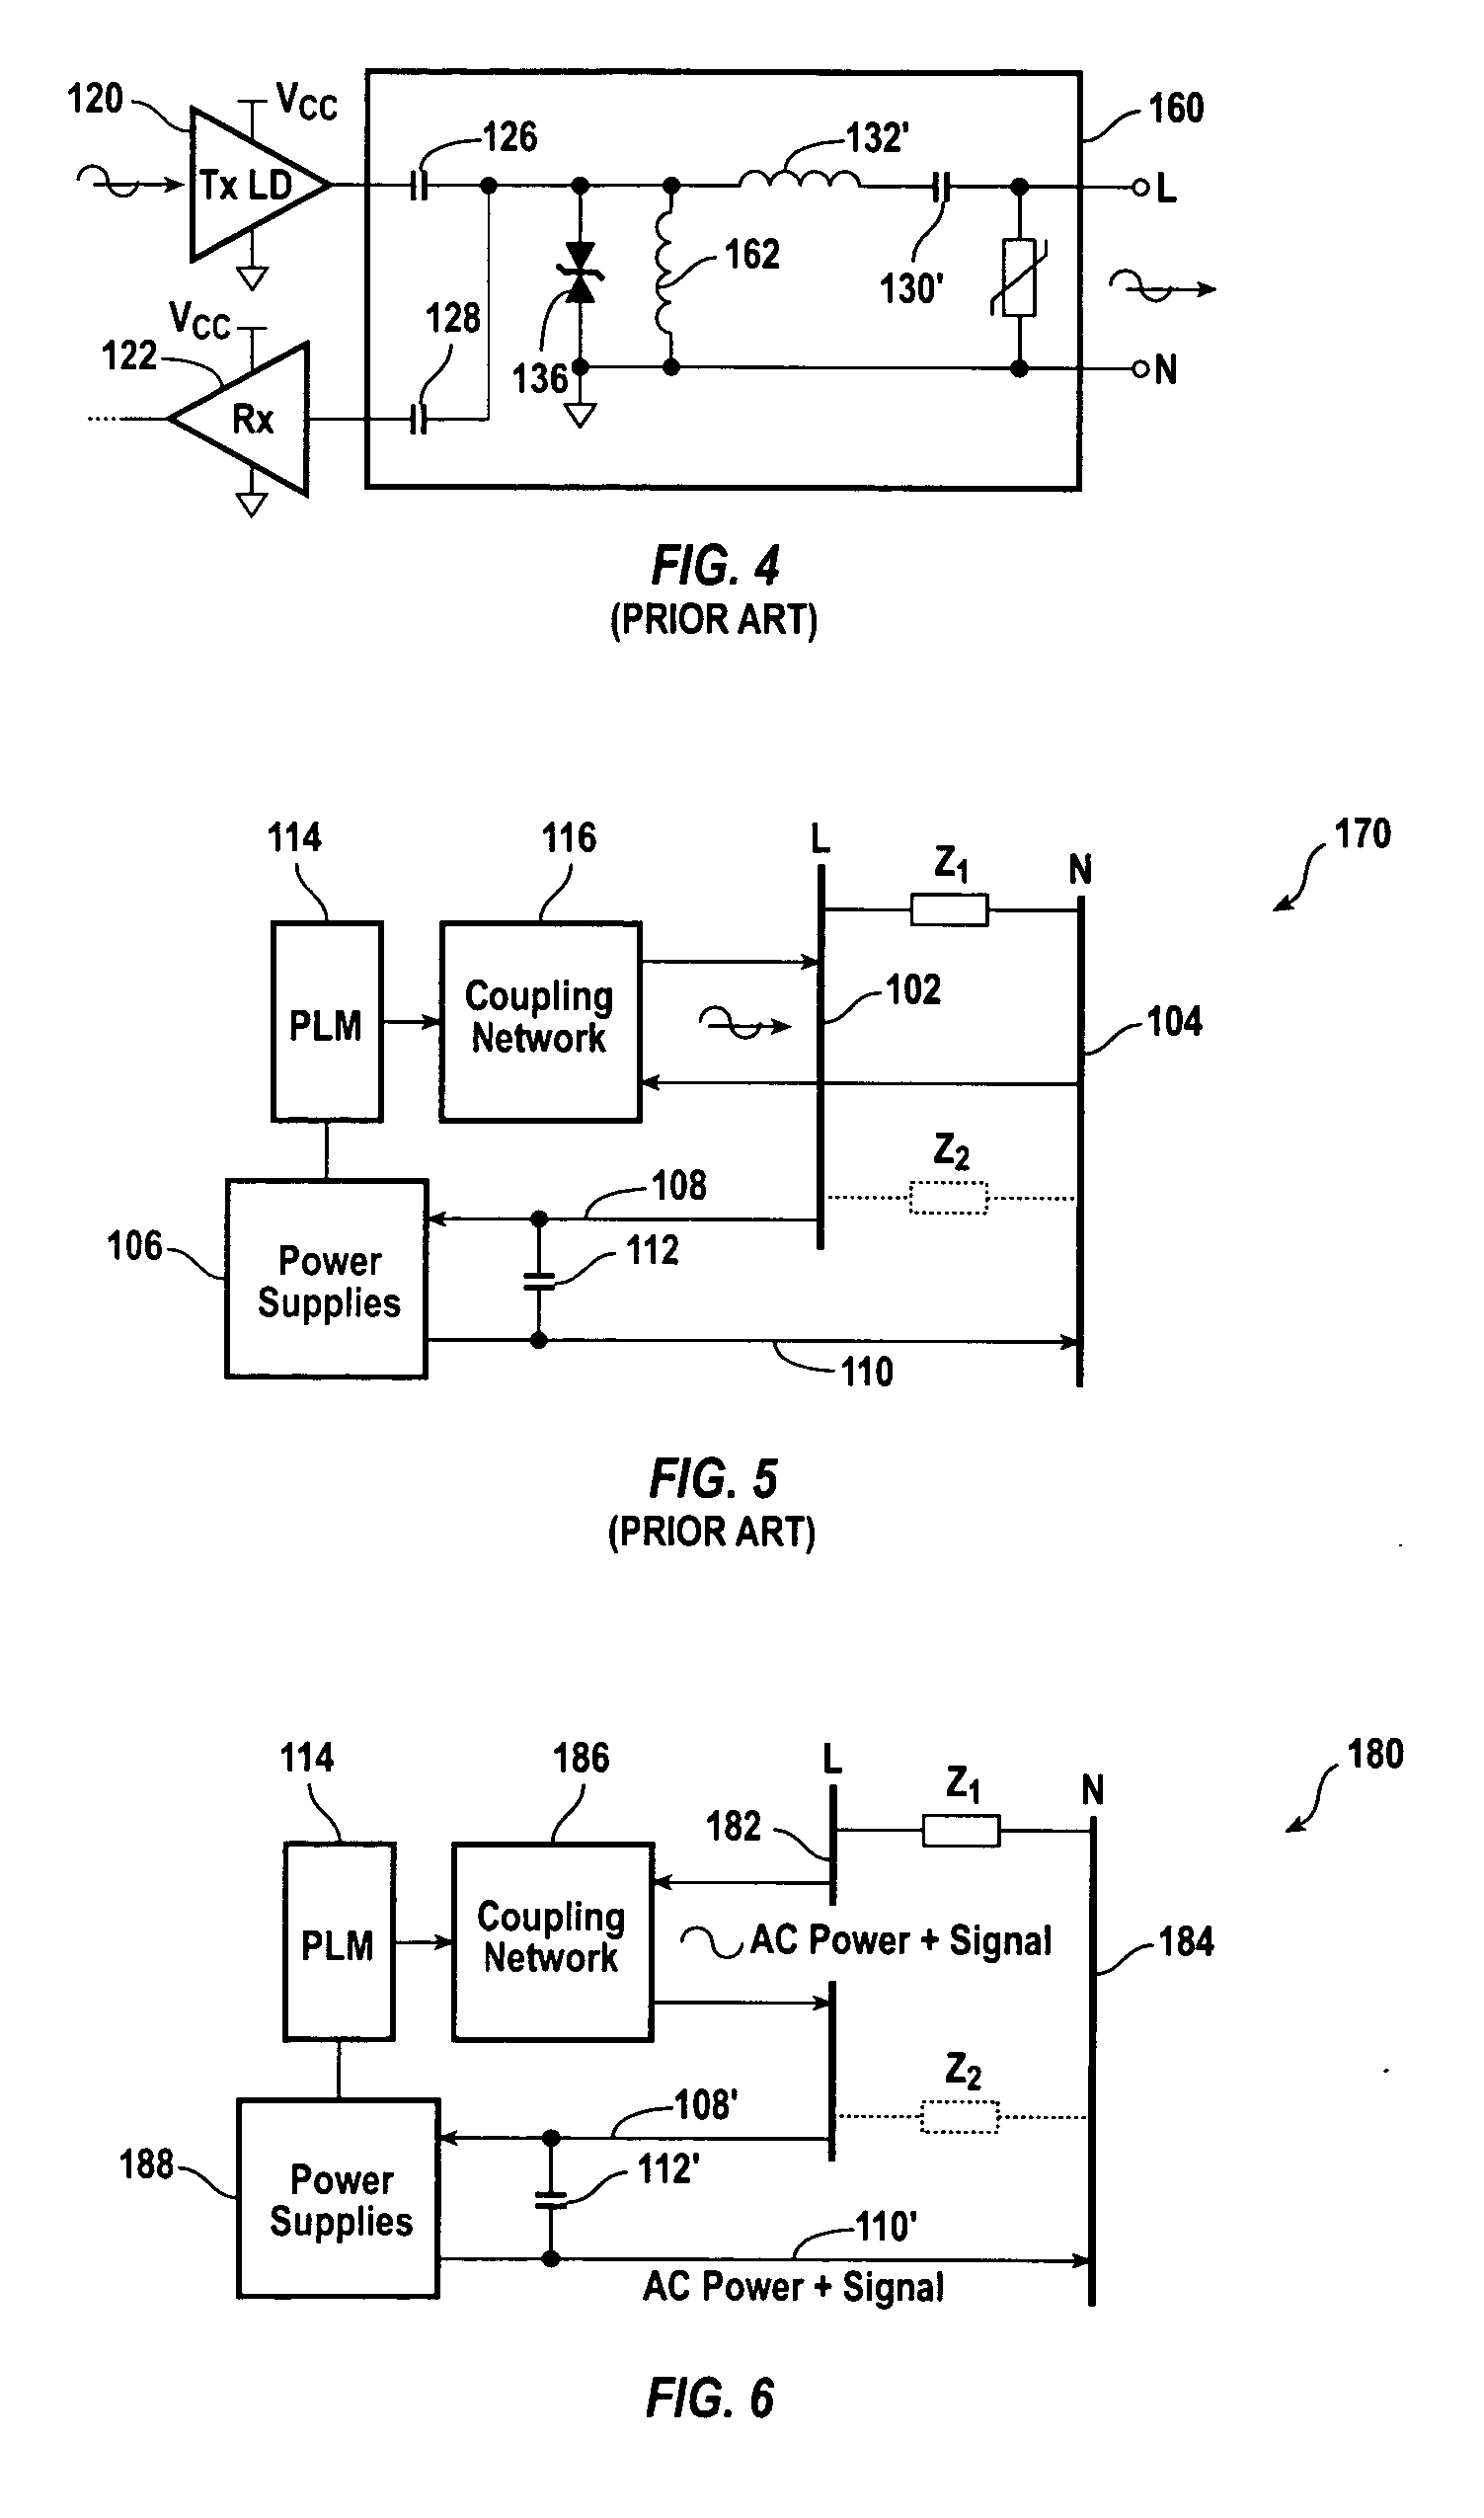 Serial signal injection using capacitive and transformer couplings for power line communications